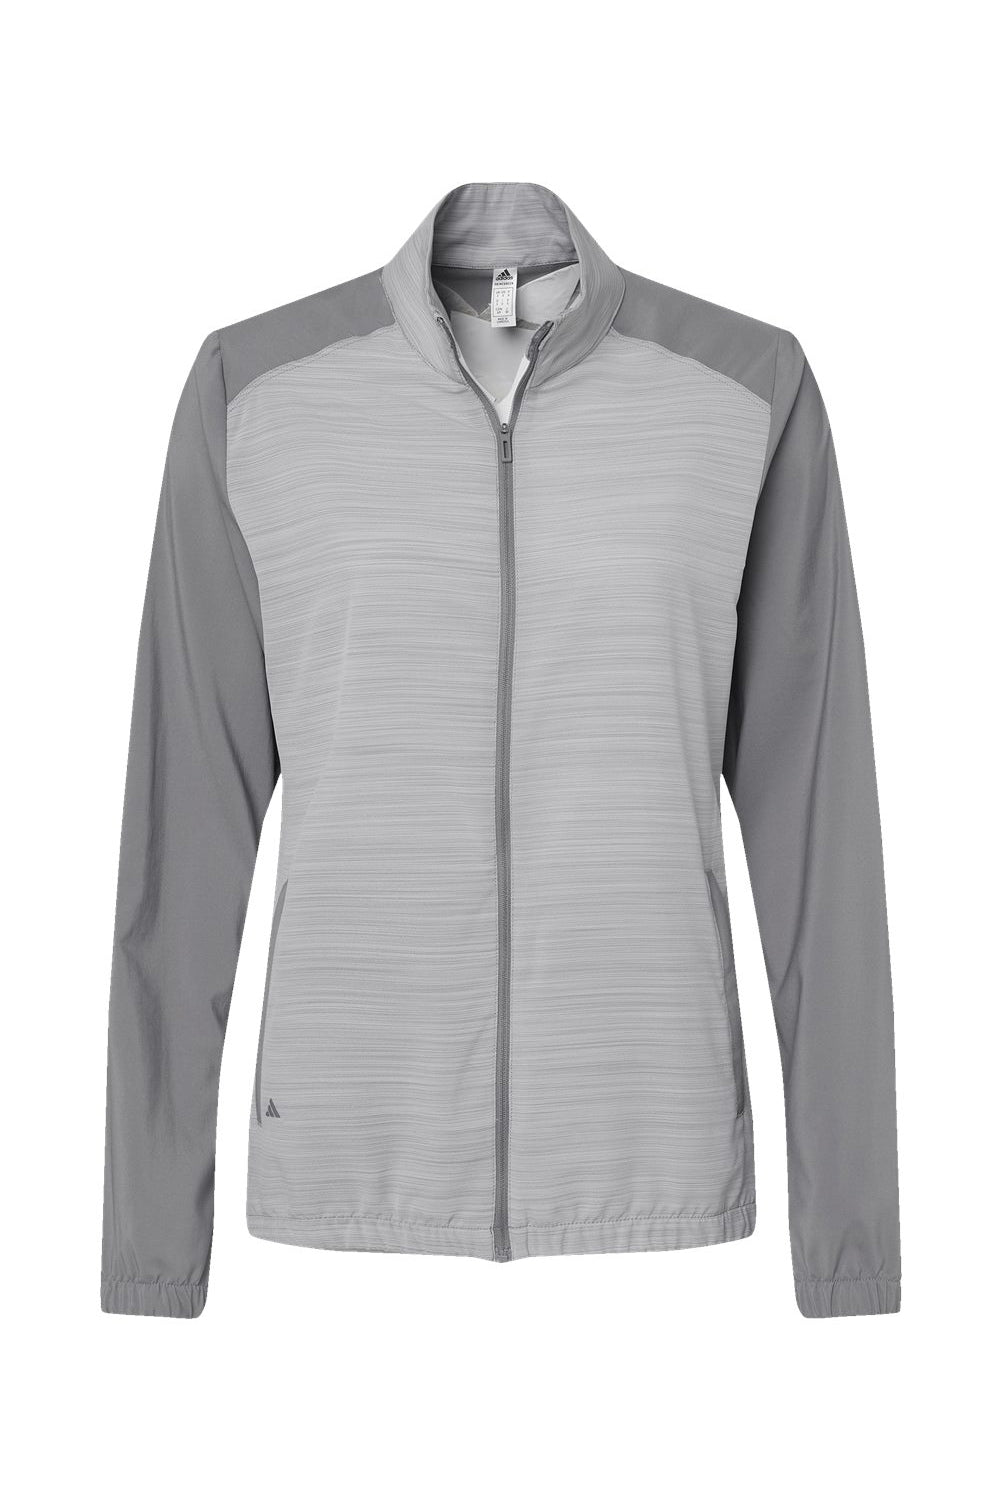 Adidas A547 Womens Colorblock Water Resistant Full Zip Windshirt Jacket Grey/Heather Grey Flat Front